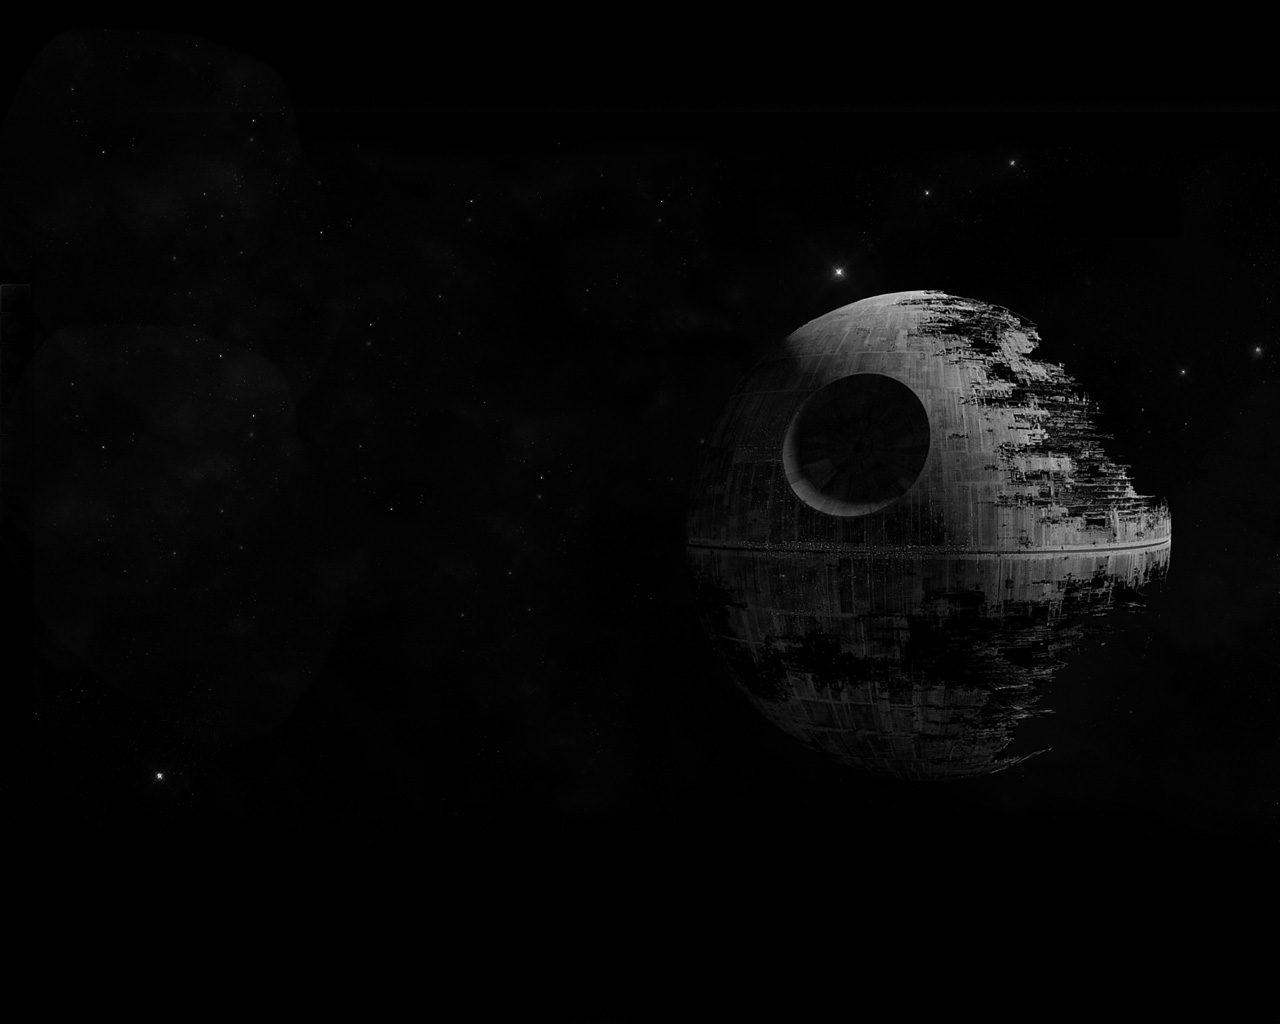 collection of cool desktop wallpaper pictures for Star Wars fans 1280x1024